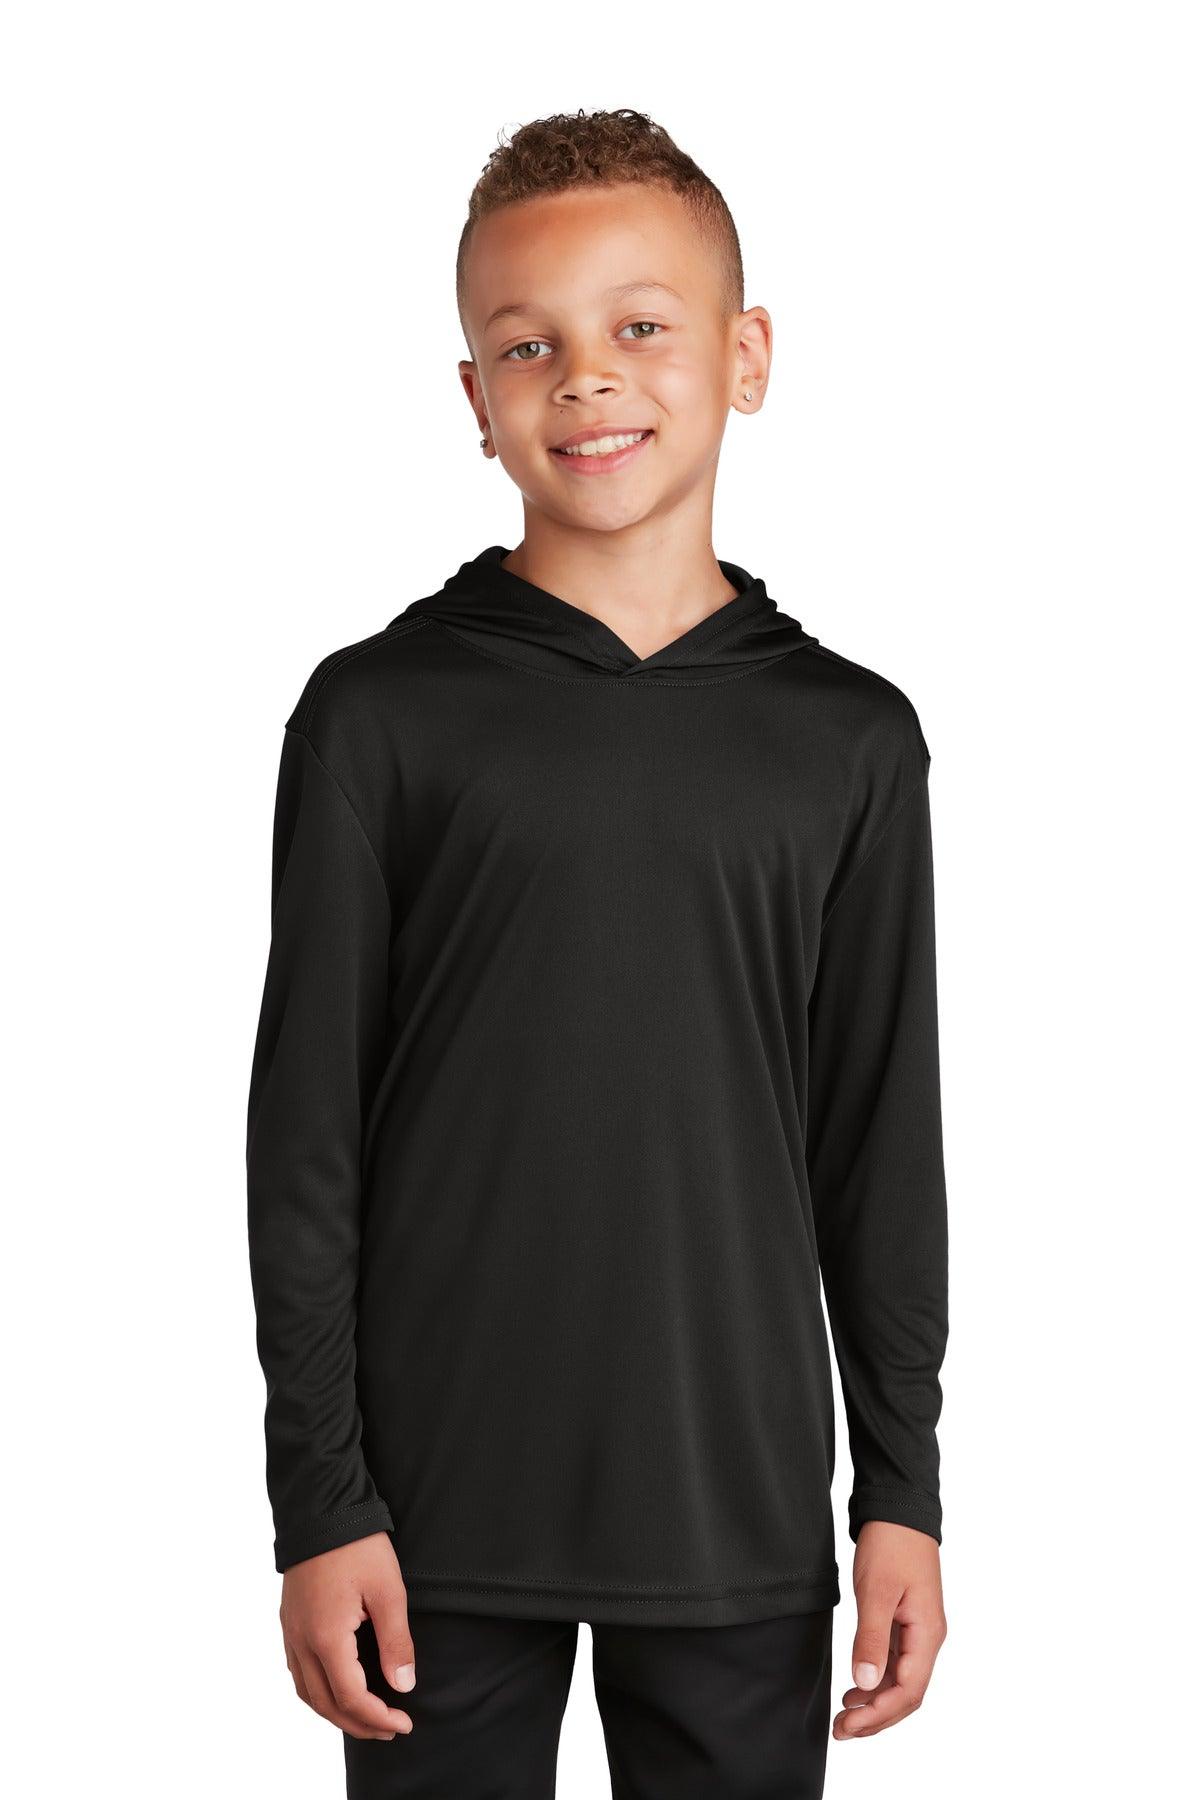 Sport-Tek Youth PosiCharge Competitor Hooded Pullover. YST358 - Dresses Max